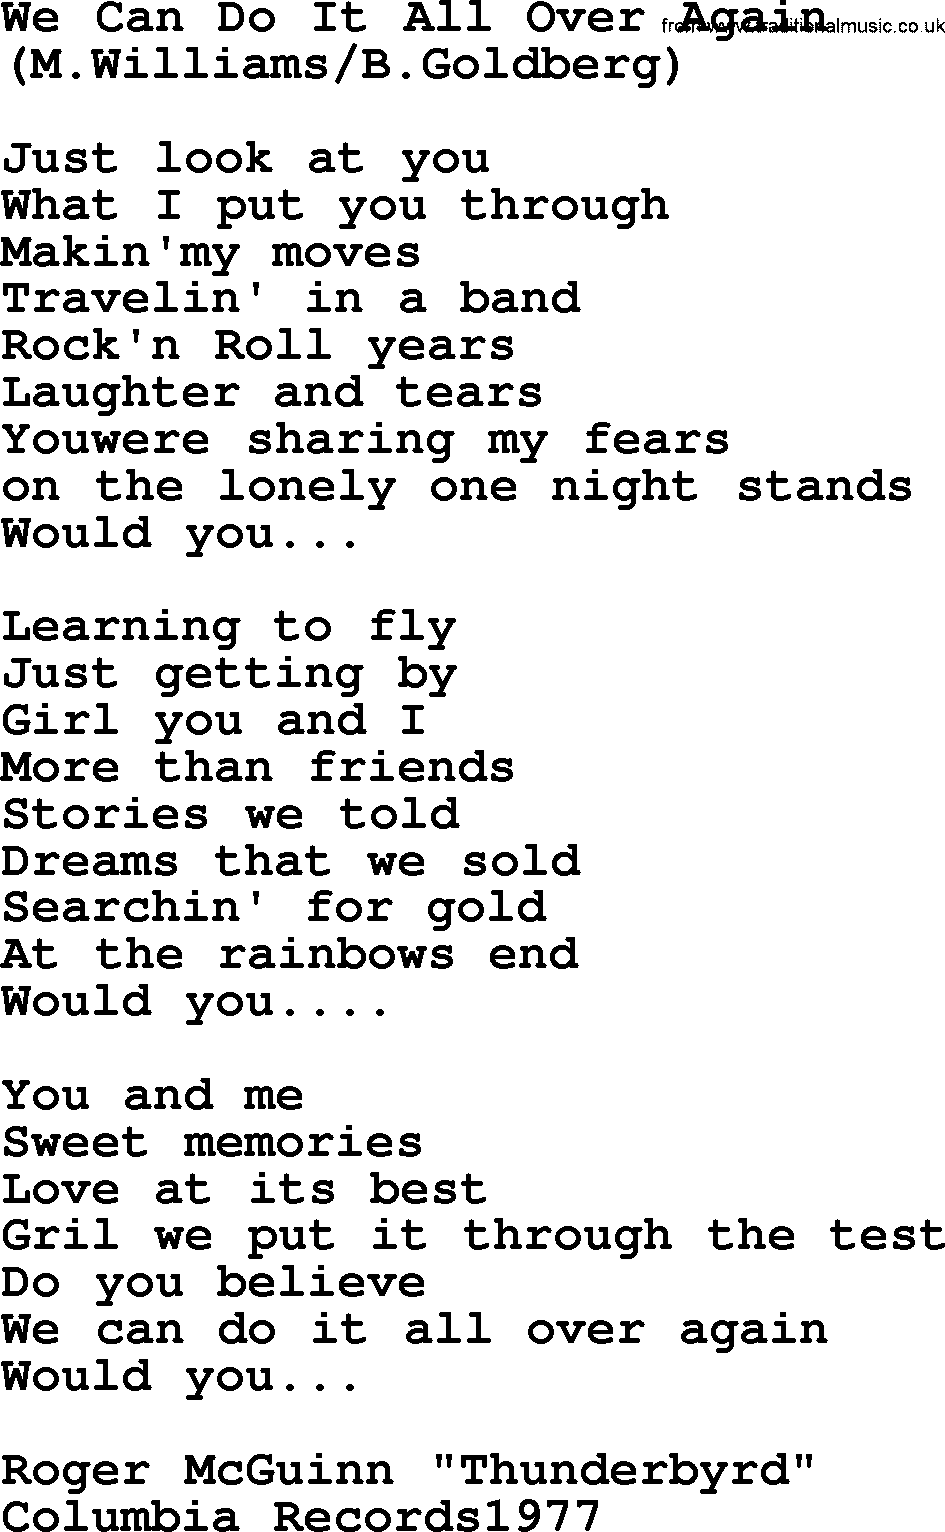 The Byrds song We Can Do It All Over Again, lyrics